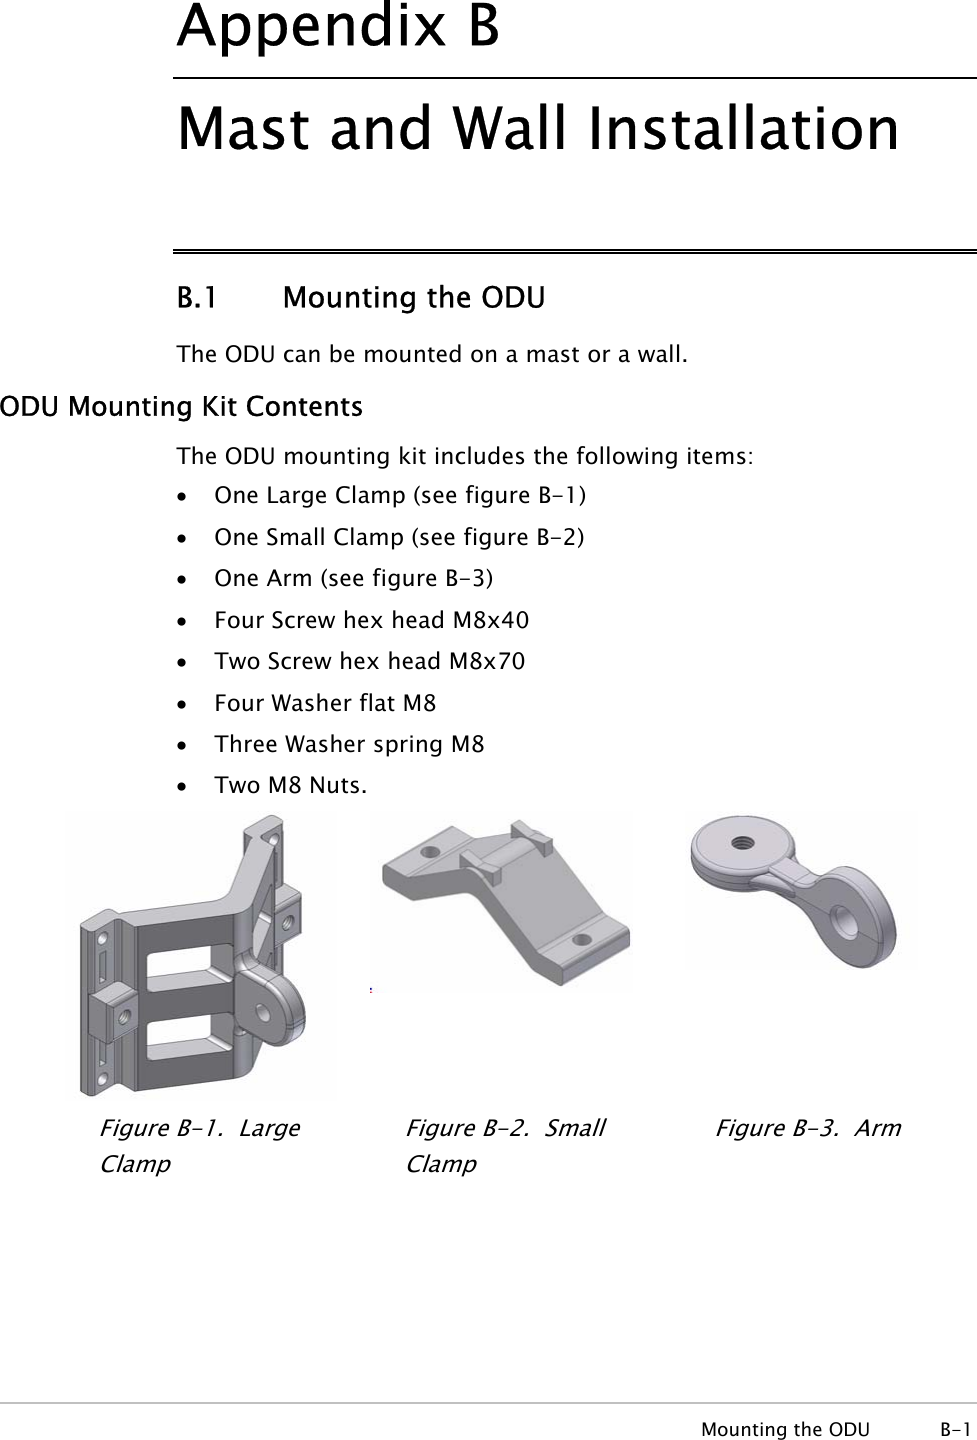 Appendix  B Mast and Wall Installation B.1   Mounting the ODU The ODU can be mounted on a mast or a wall. ODU Mounting Kit Contents The ODU mounting kit includes the following items: • One Large Clamp (see figure B-1) • One Small Clamp (see figure B-2) • One Arm (see figure B-3) • Four Screw hex head M8x40 • Two Screw hex head M8x70 • Four Washer flat M8 • Three Washer spring M8 • Two M8 Nuts.   Figure  B-1.  Large Clamp Figure  B-2.  Small Clamp Figure  B-3.  Arm  Mounting the ODU  B-1 